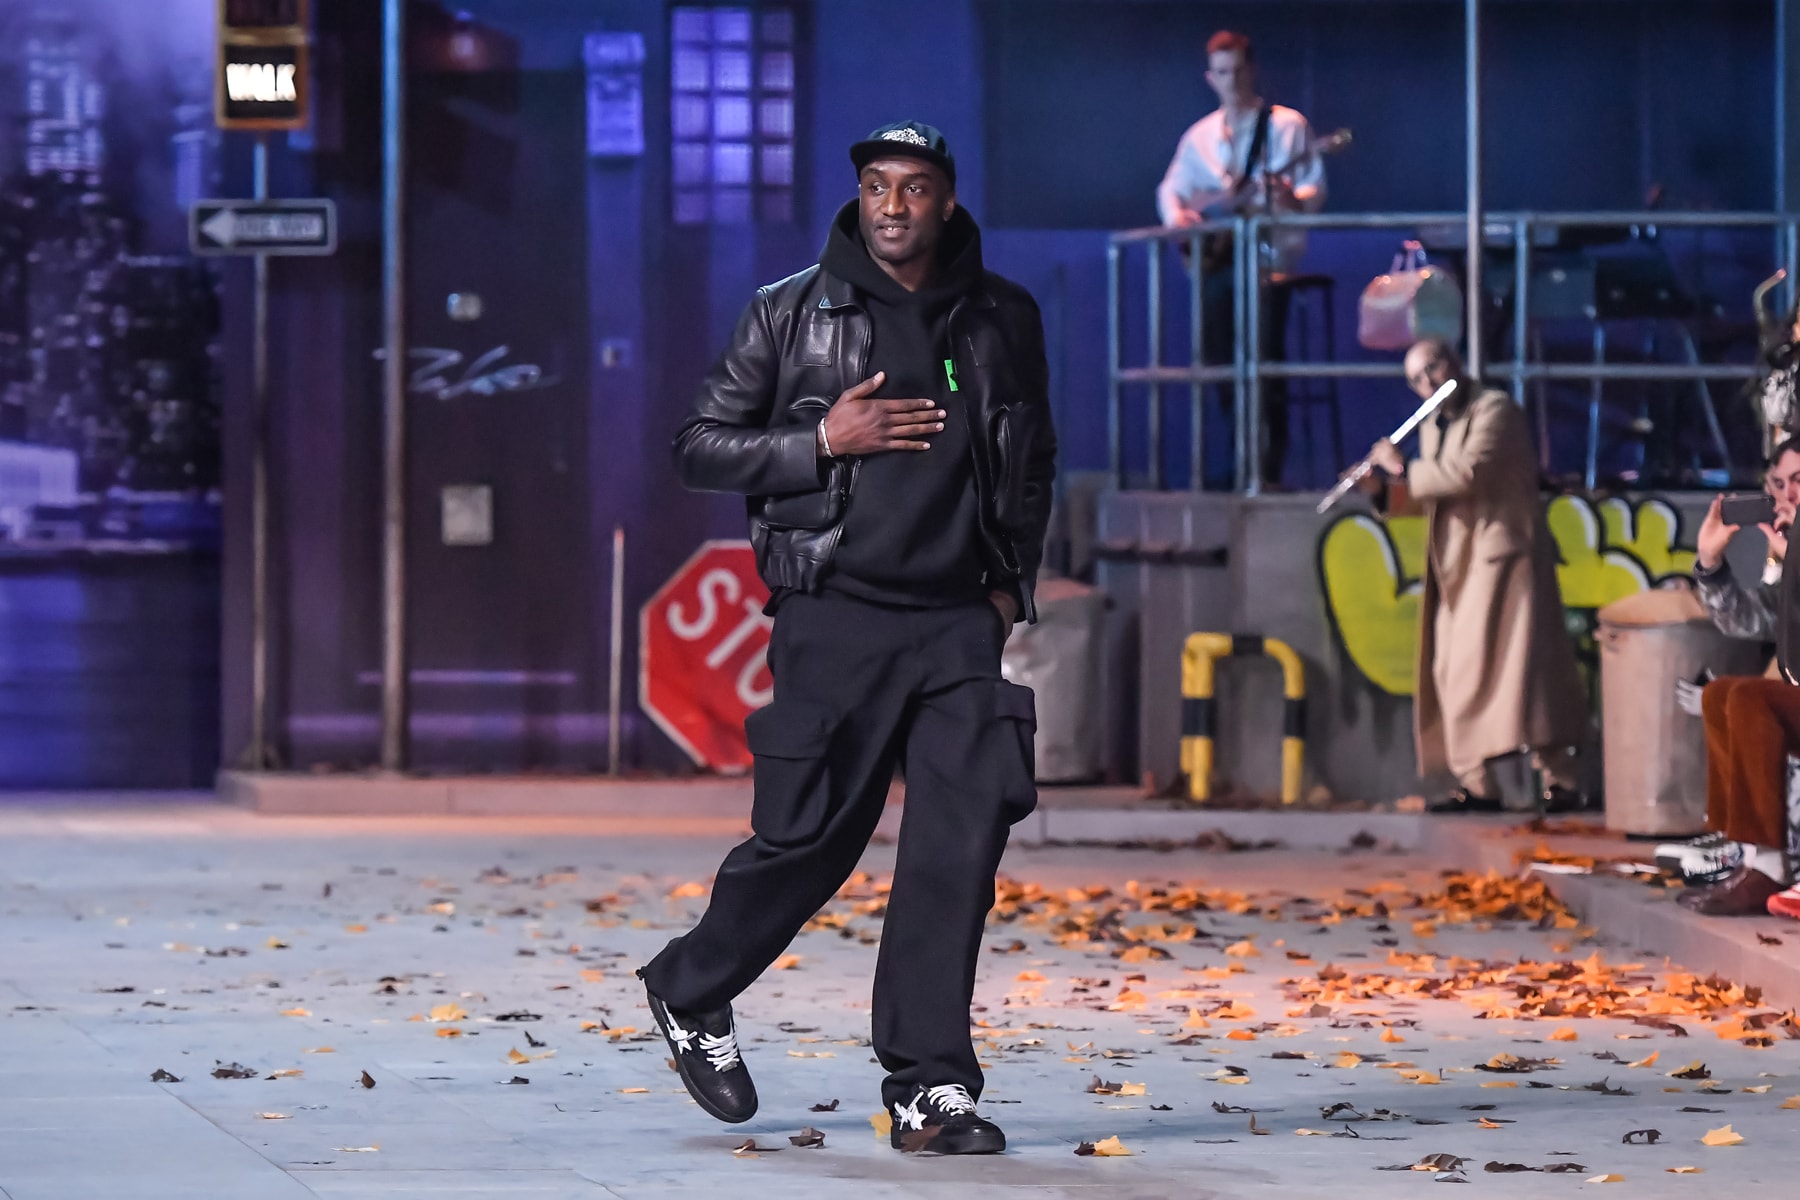 See All of Virgil Abloh's Fall 2019 Sneakers and Accessories for